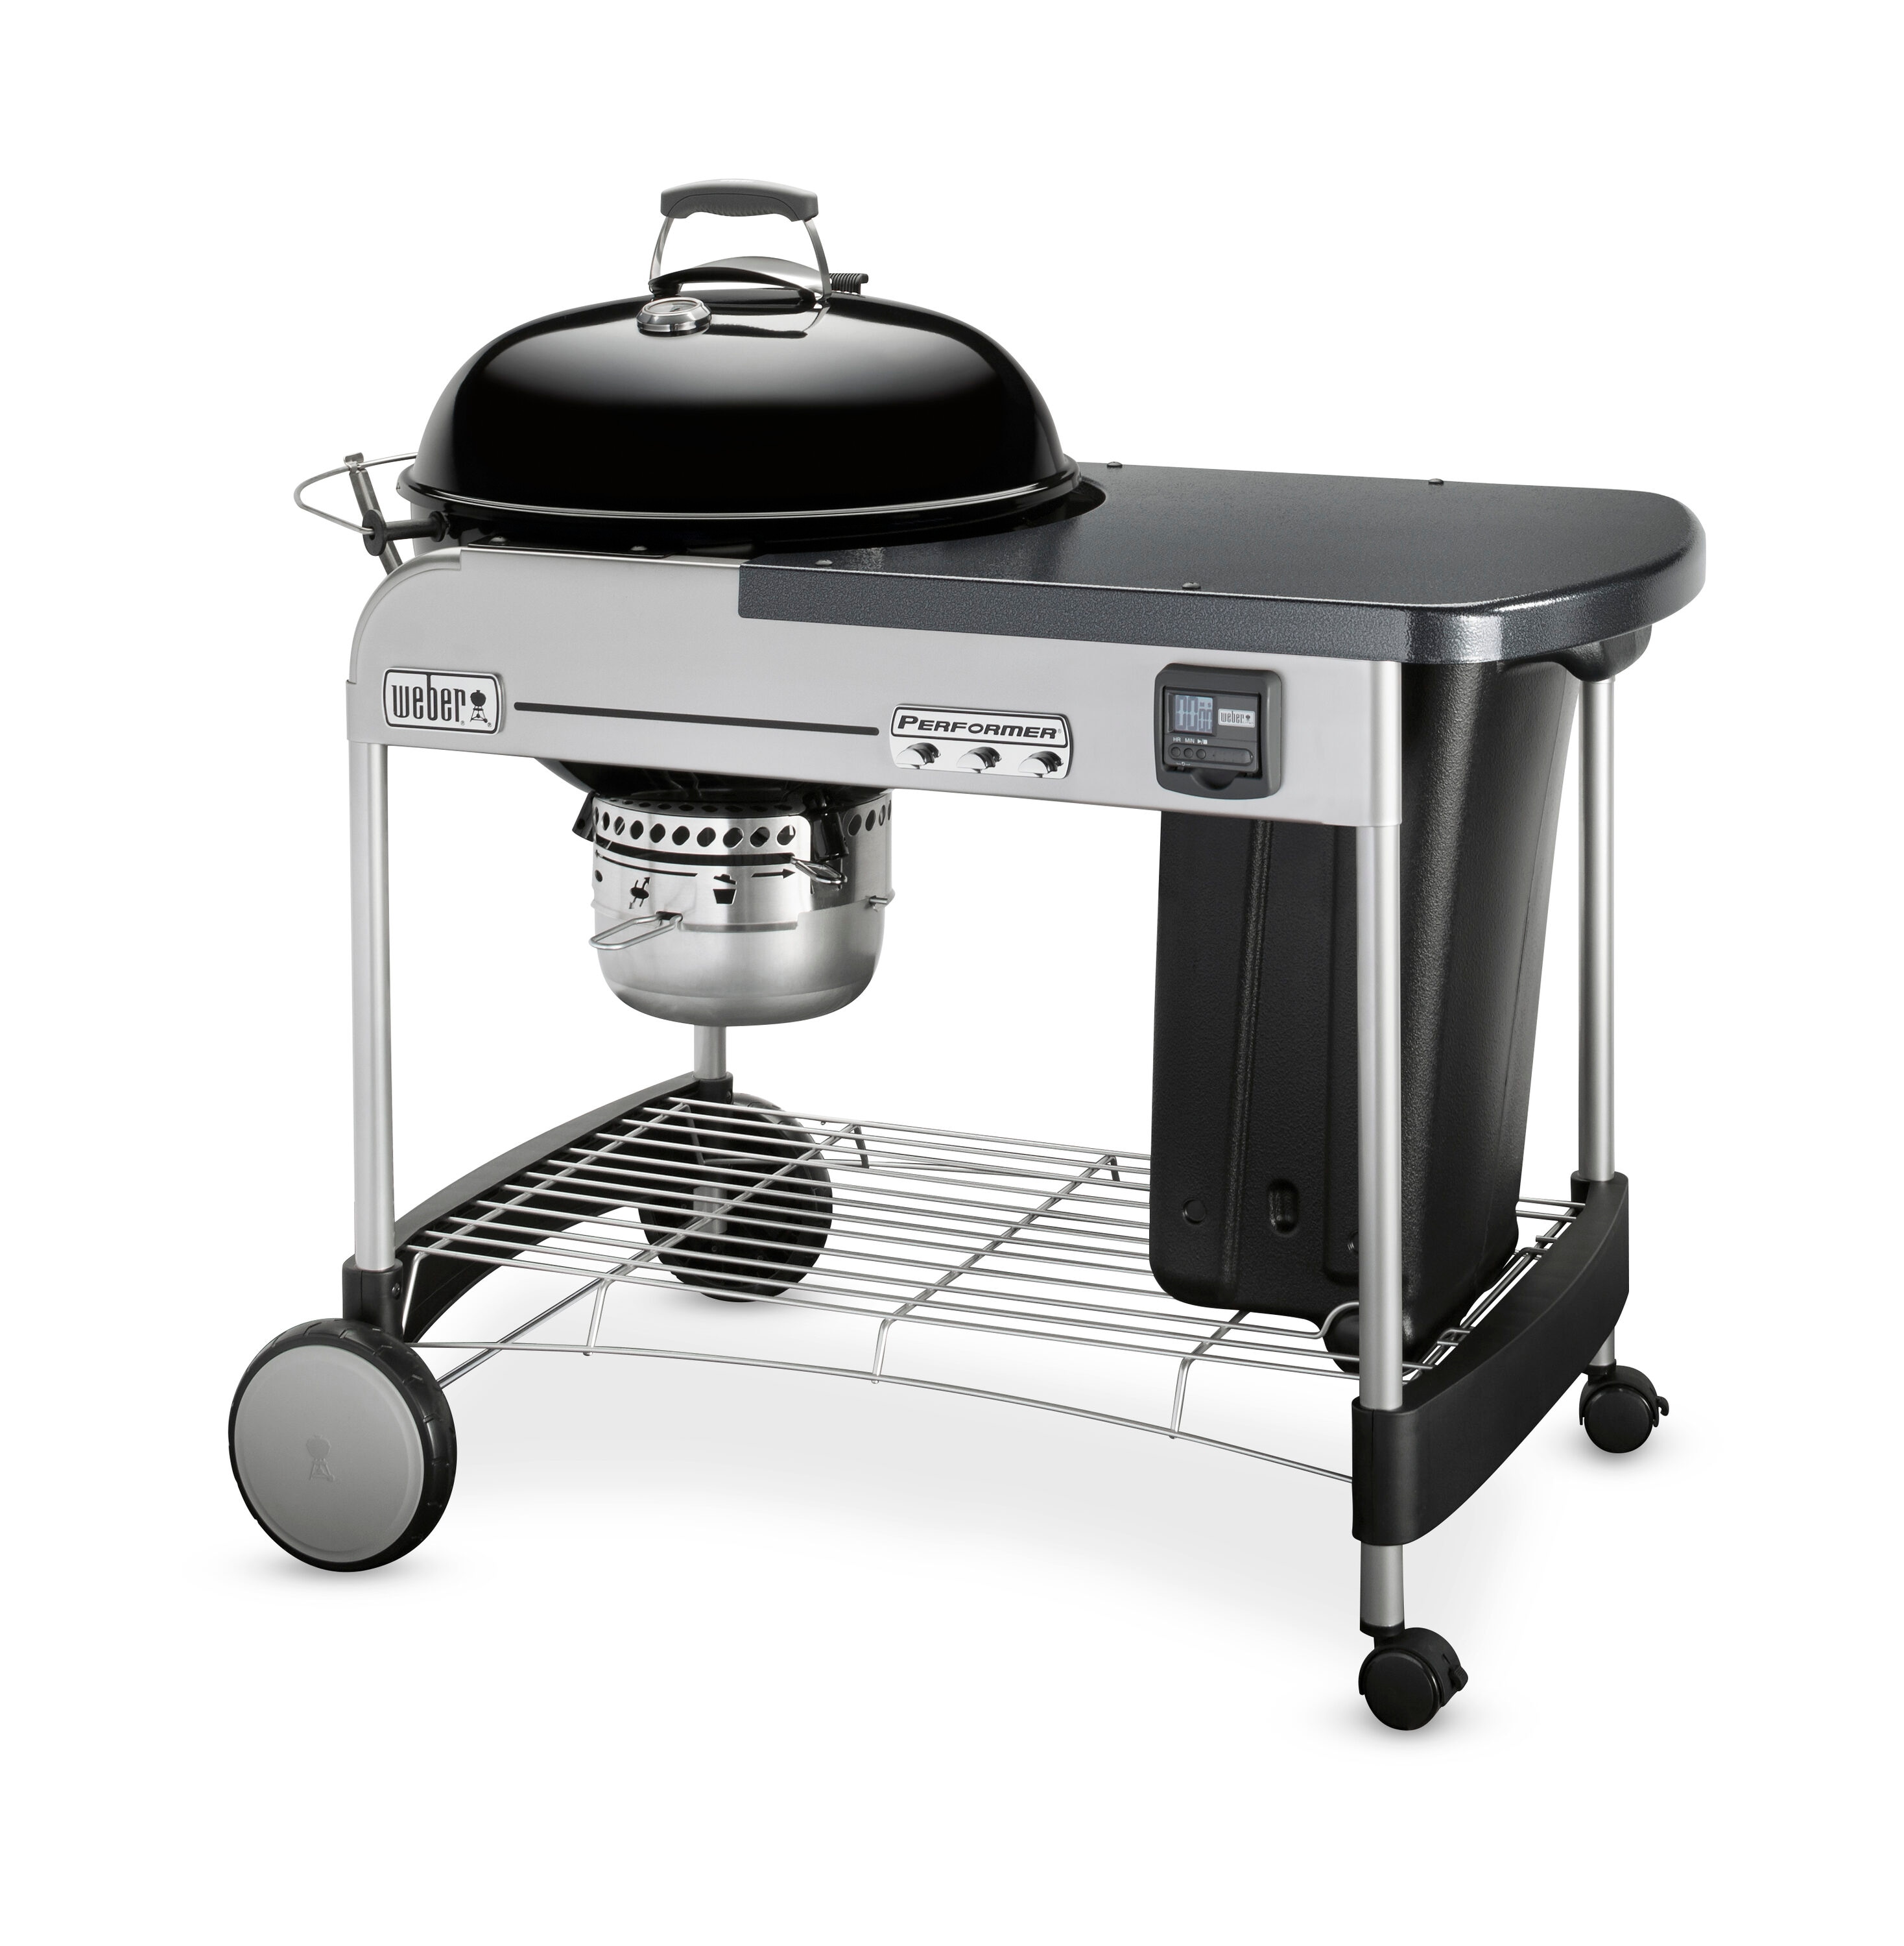 Weber Performer Premium 22-in W Black Kettle Charcoal Grill in Charcoal Grills department at Lowes.com